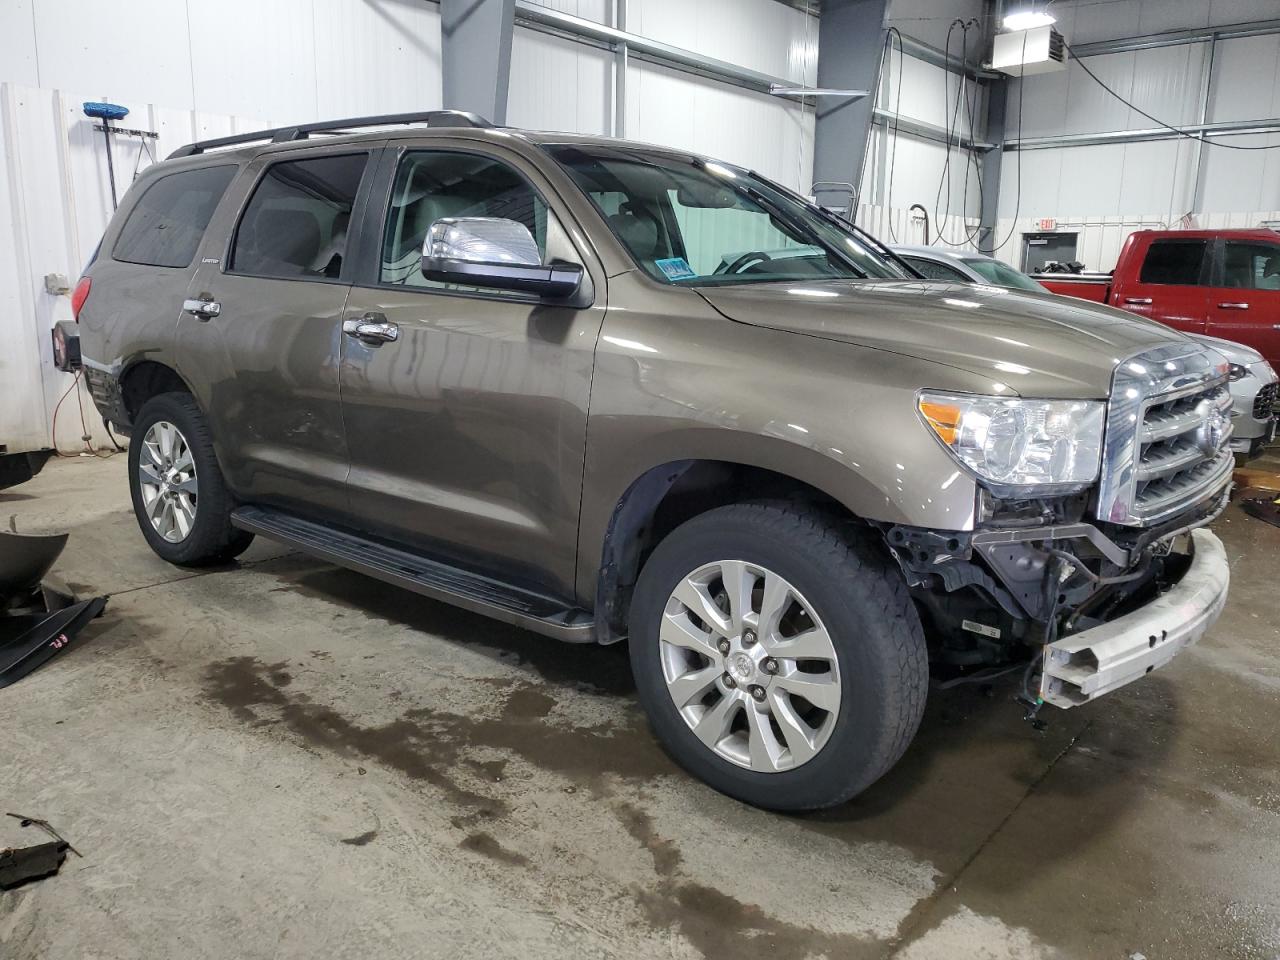 5TDJW5G10DS079106  - TOYOTA SEQUOIA  2013 IMG - 3